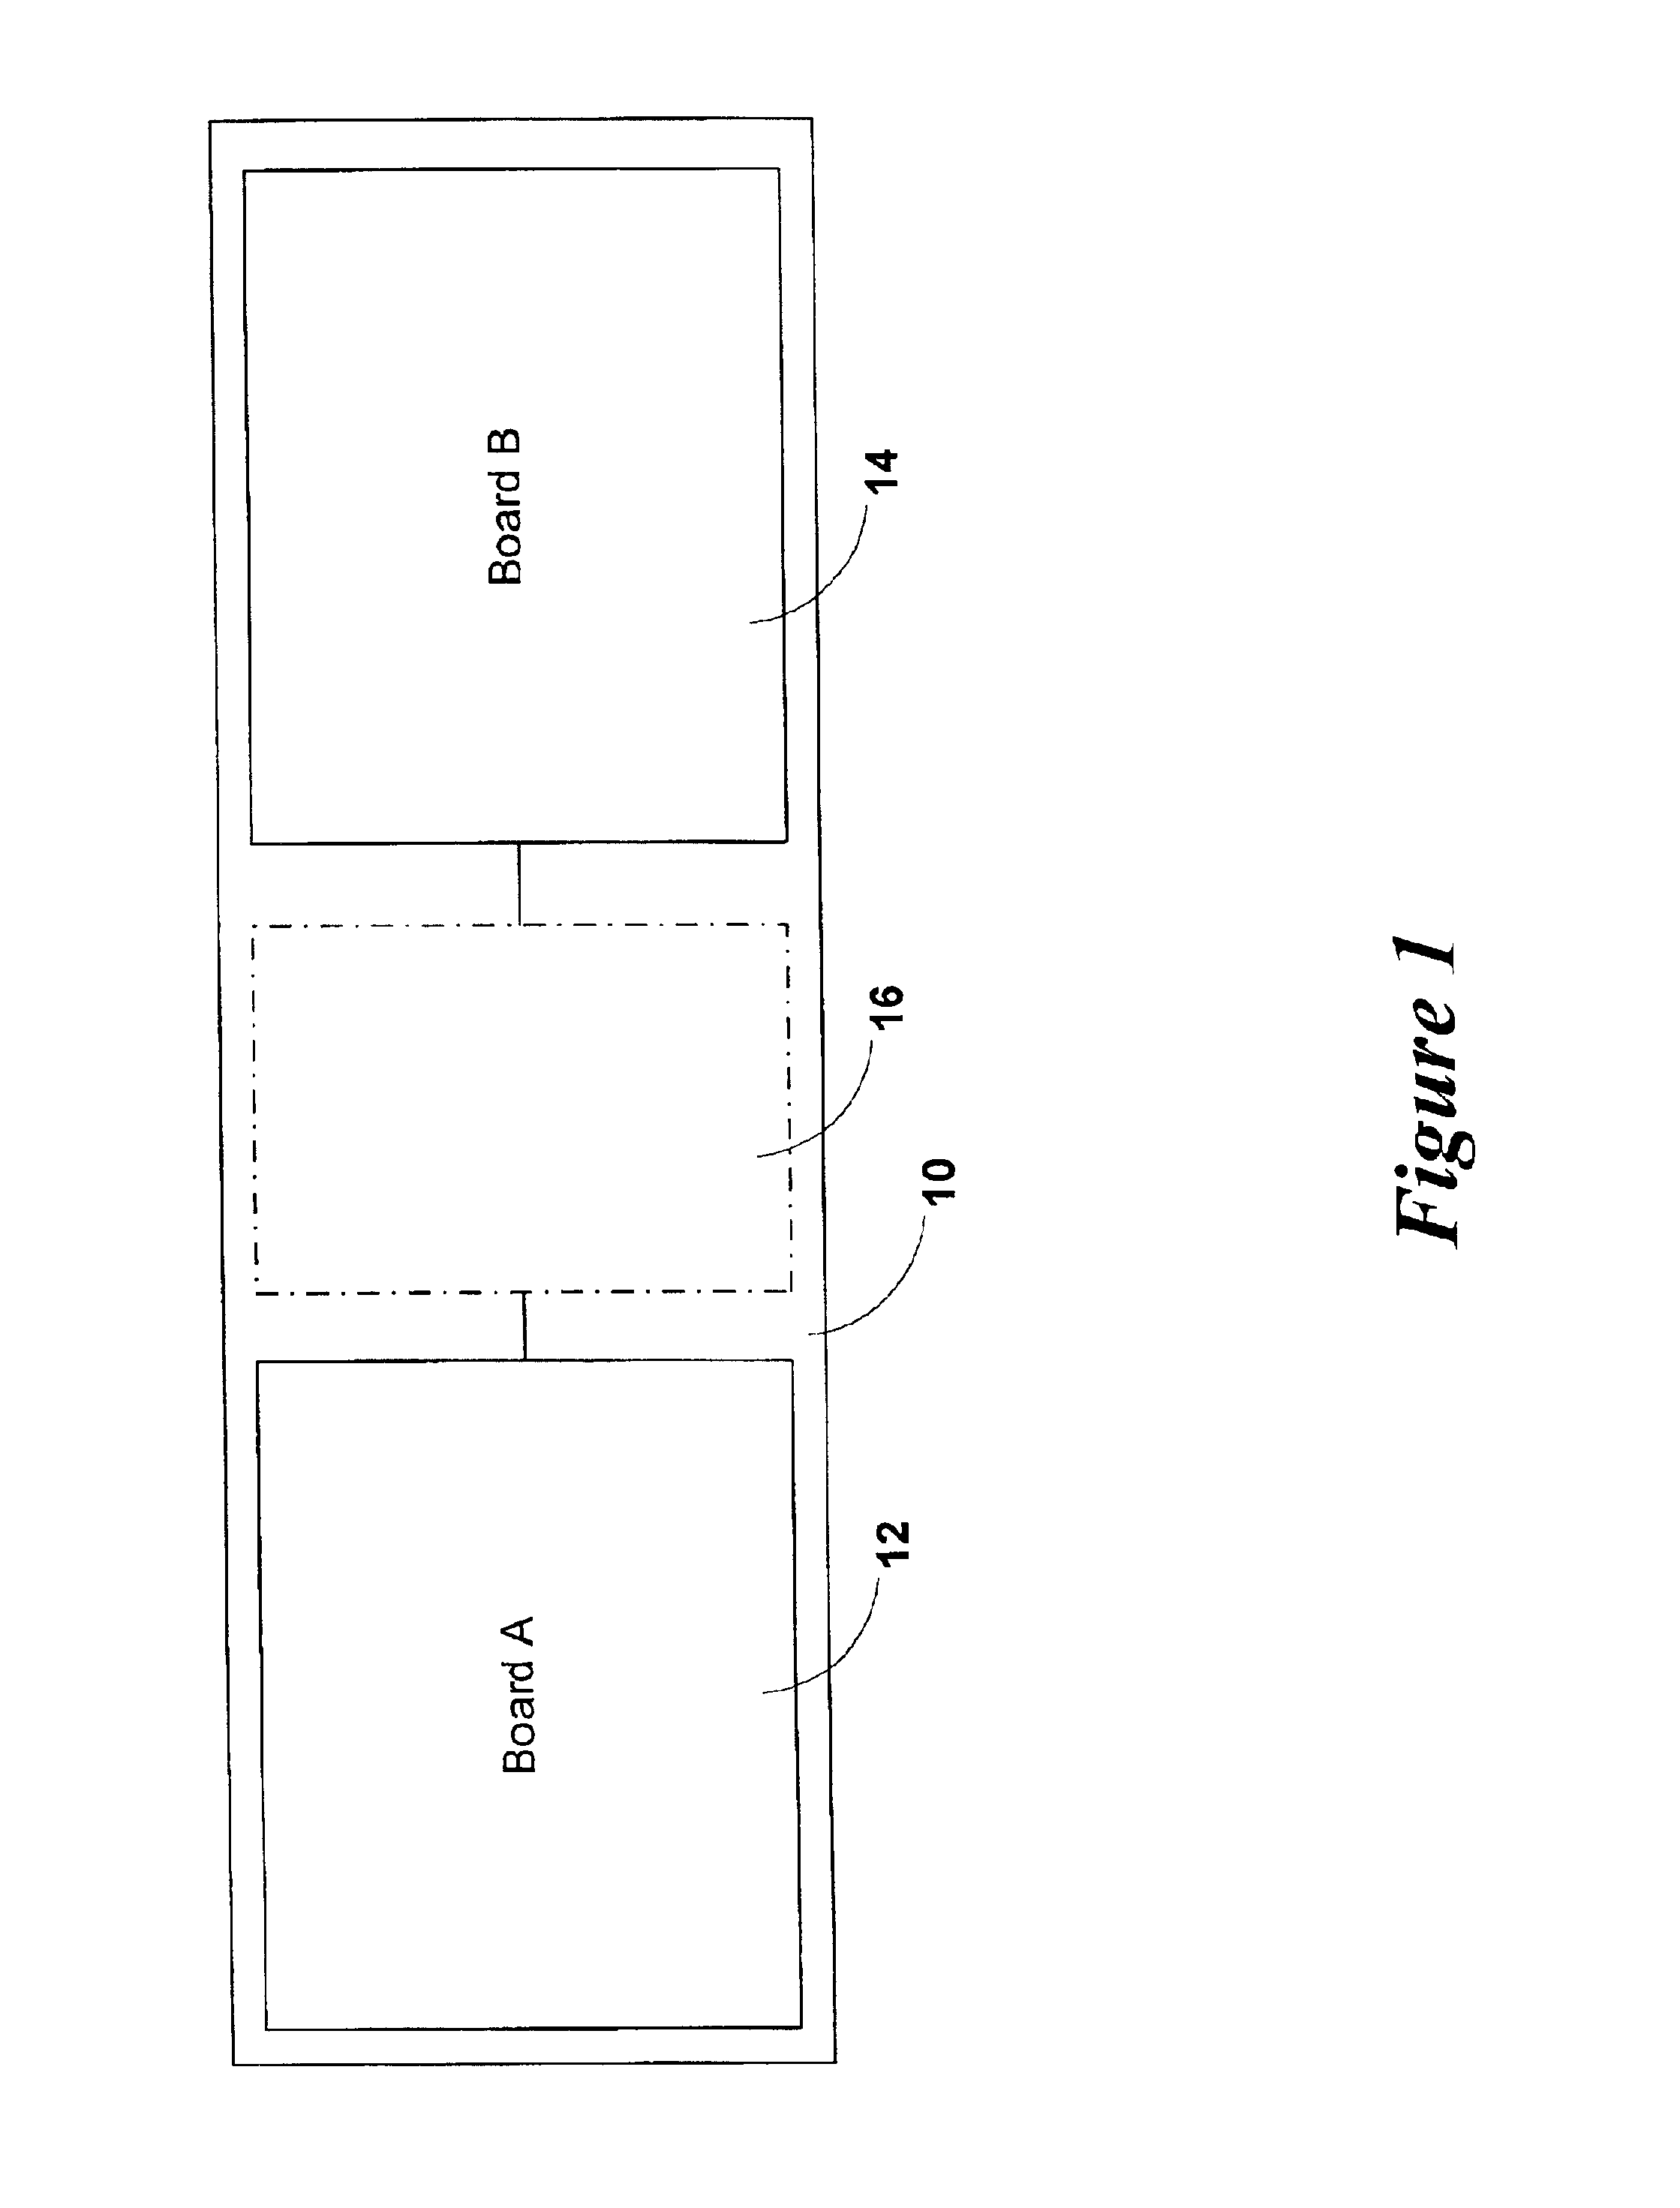 System and method of operation of dual redundant controllers